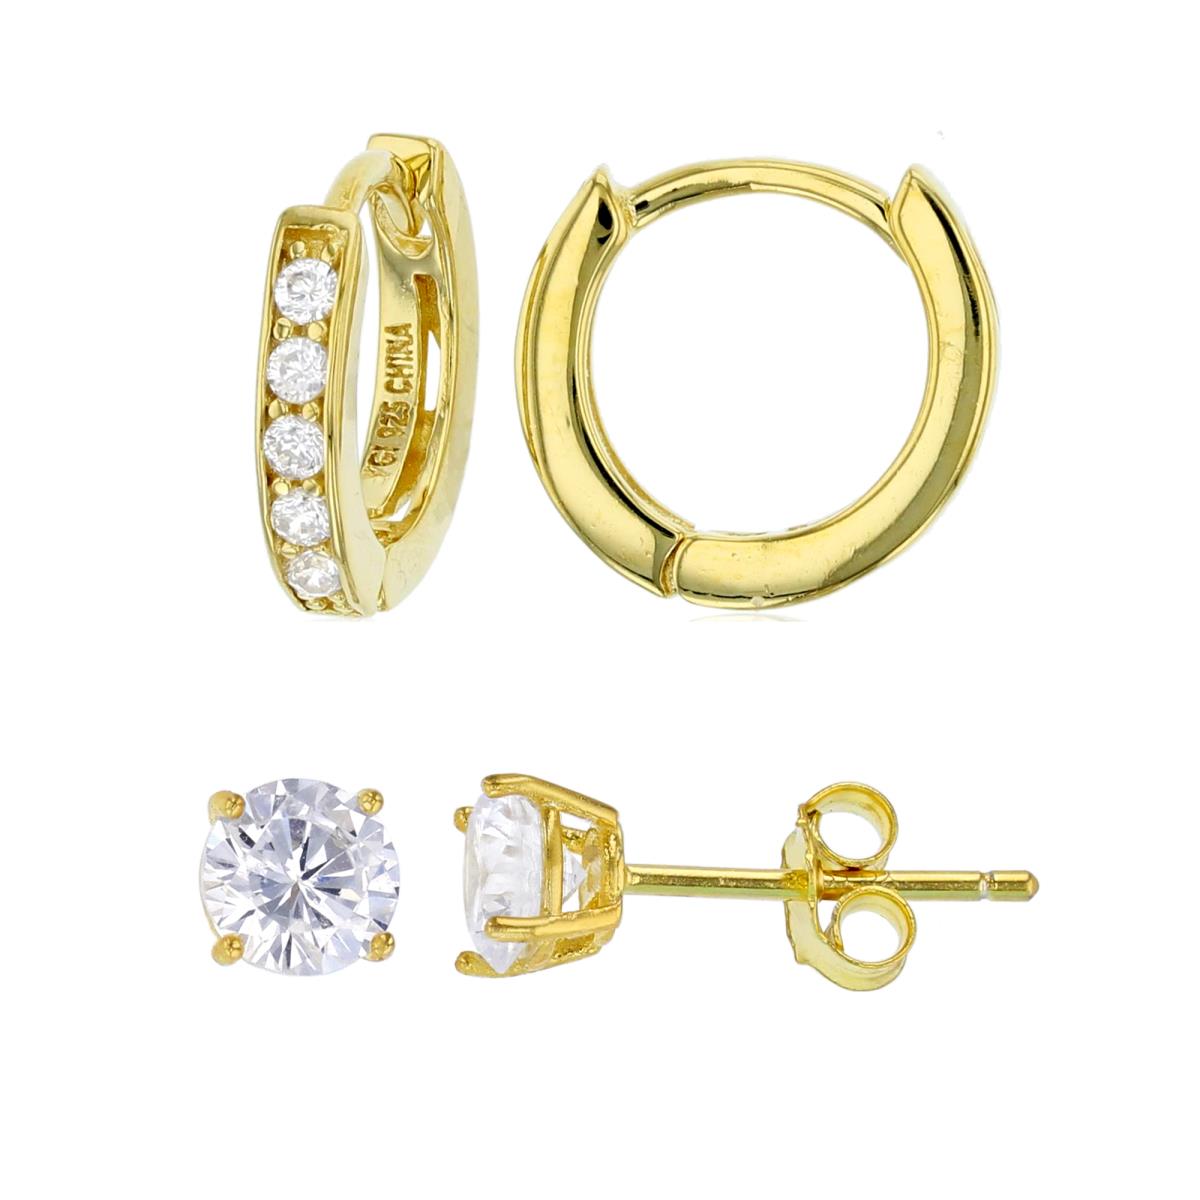 Sterling Silver Yellow Prong Set Huggies & 5mm Round Solitaire Stud Earring Set